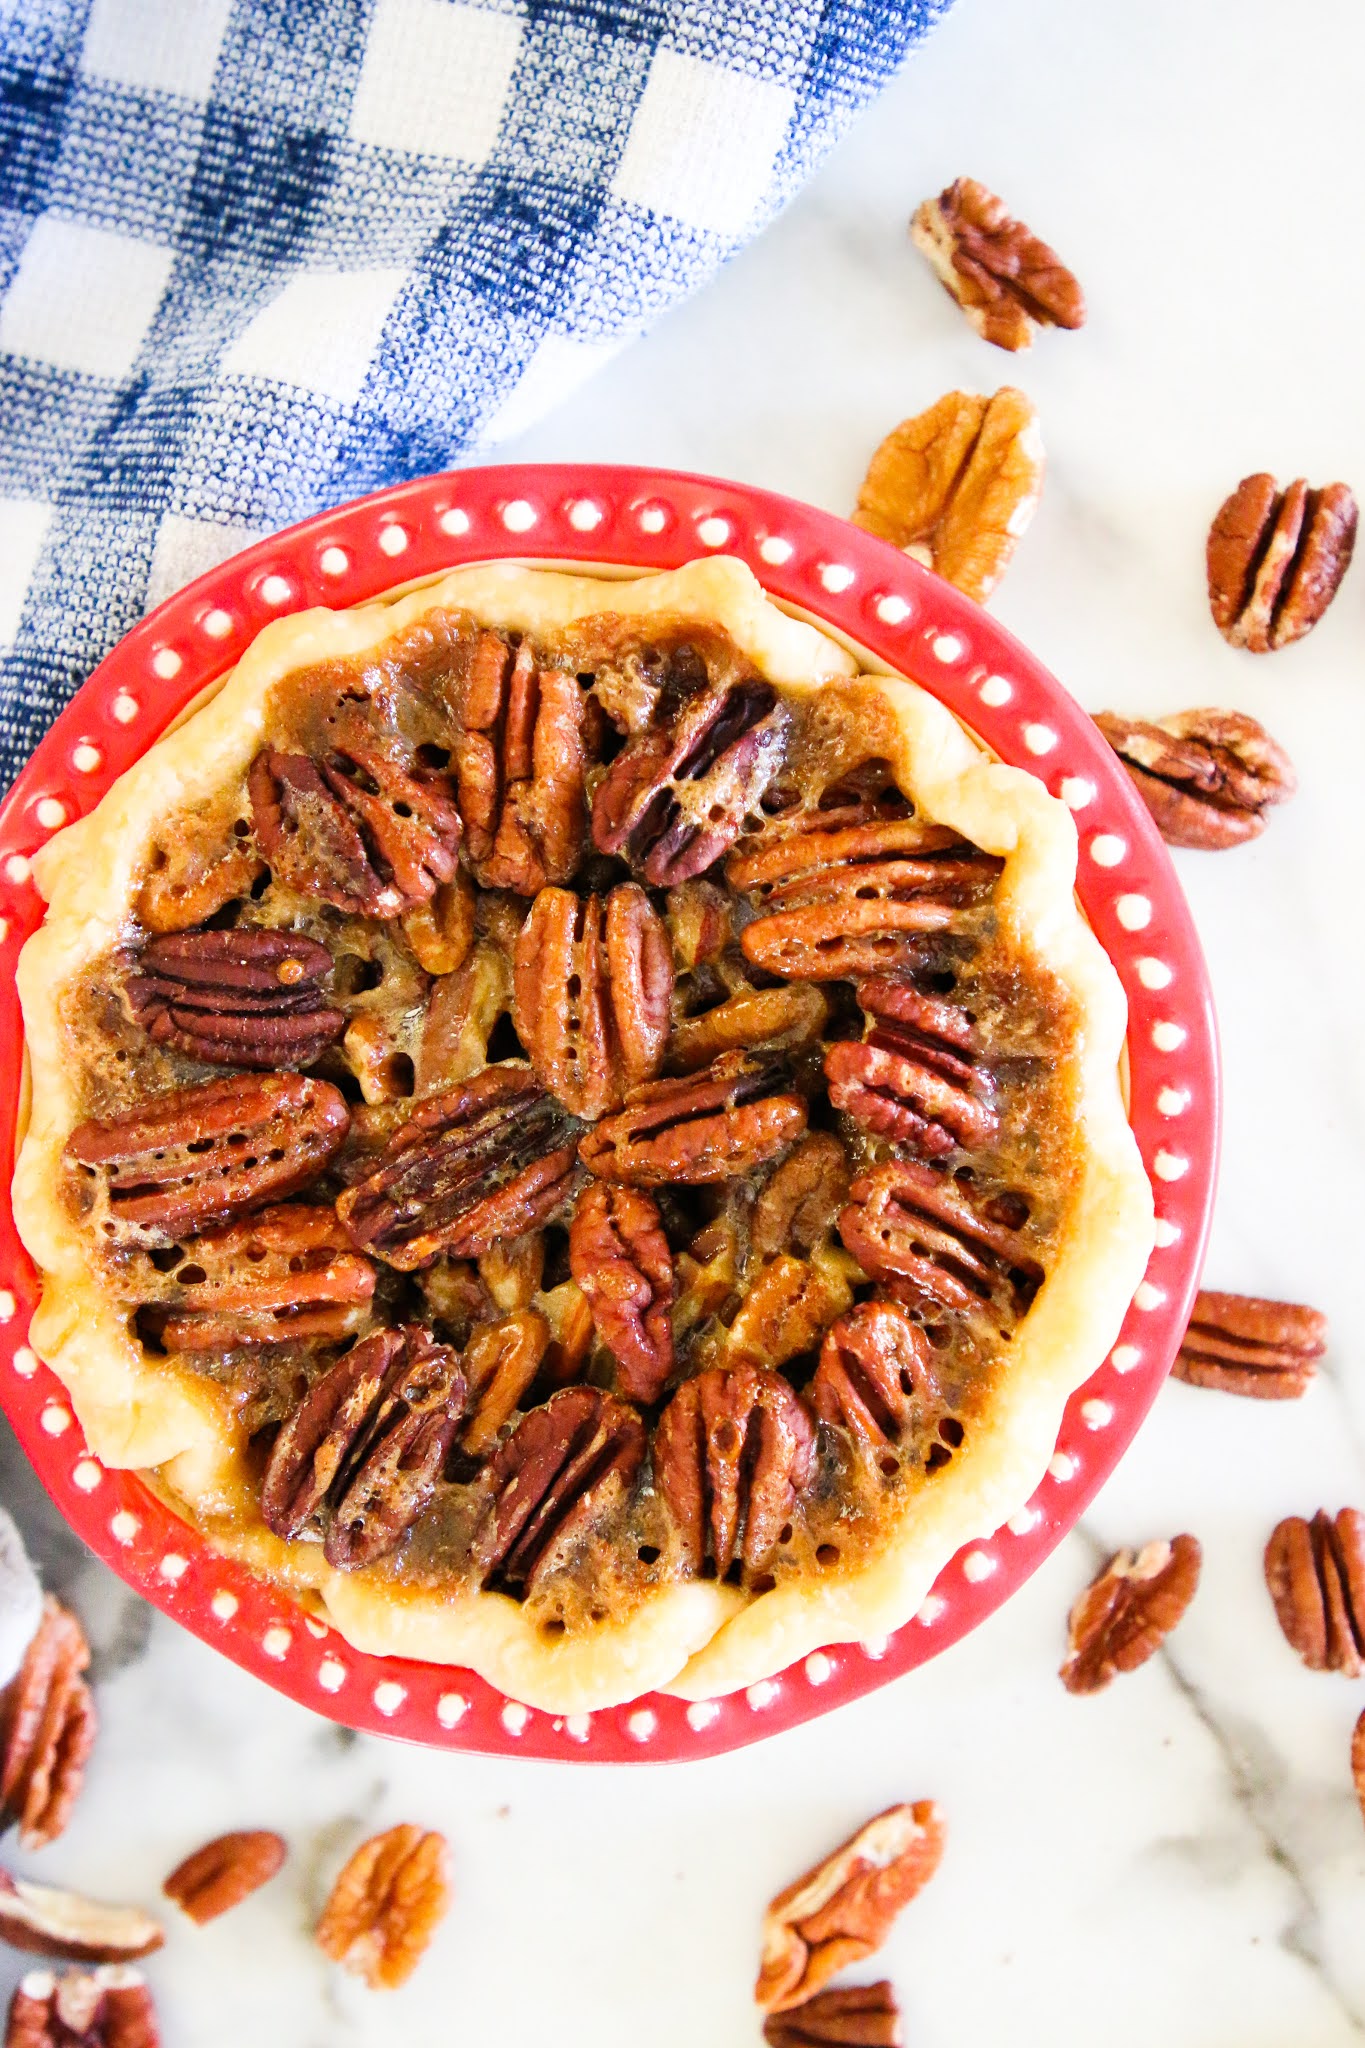 Pecan pie in a red pie dish with a blue dish towel in the background.